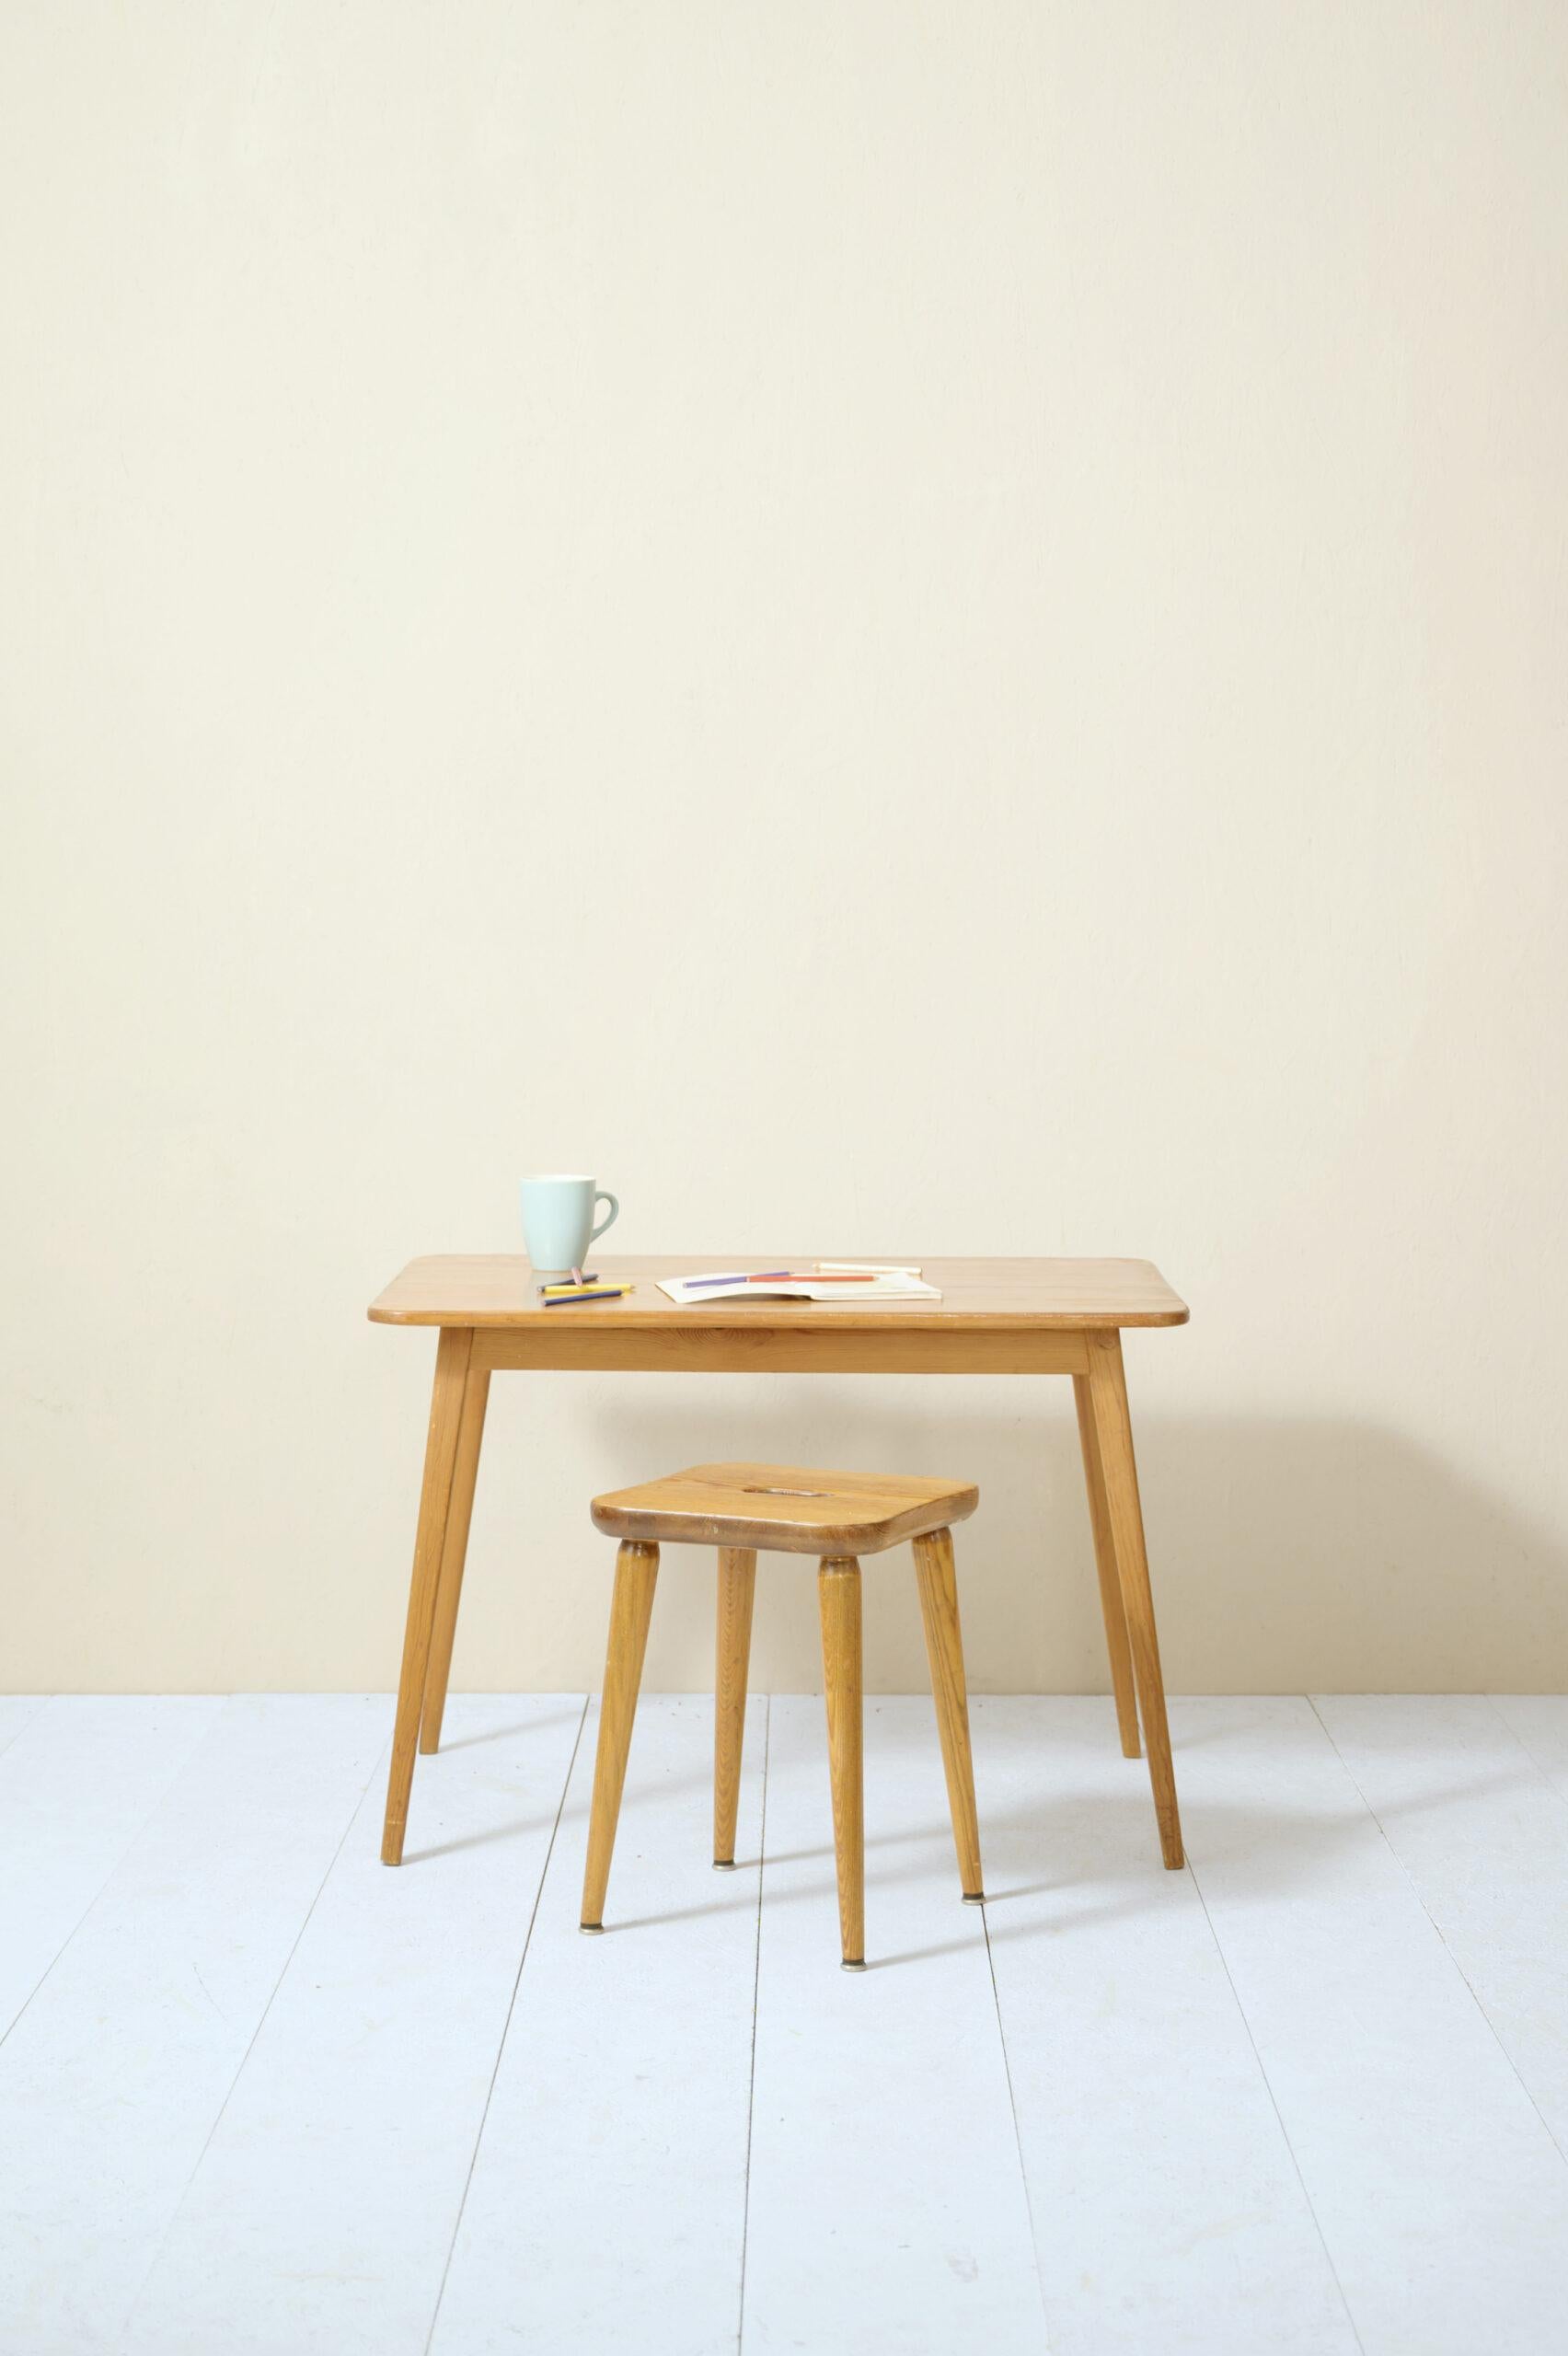 Pine wood table and stool set designed by G.Malmvall for The Swedish Fur company.

Two pieces of furniture of Scandinavian origin, evident in the type of wood used and the rustic but already modern style. Characterized by soft, simple lines and